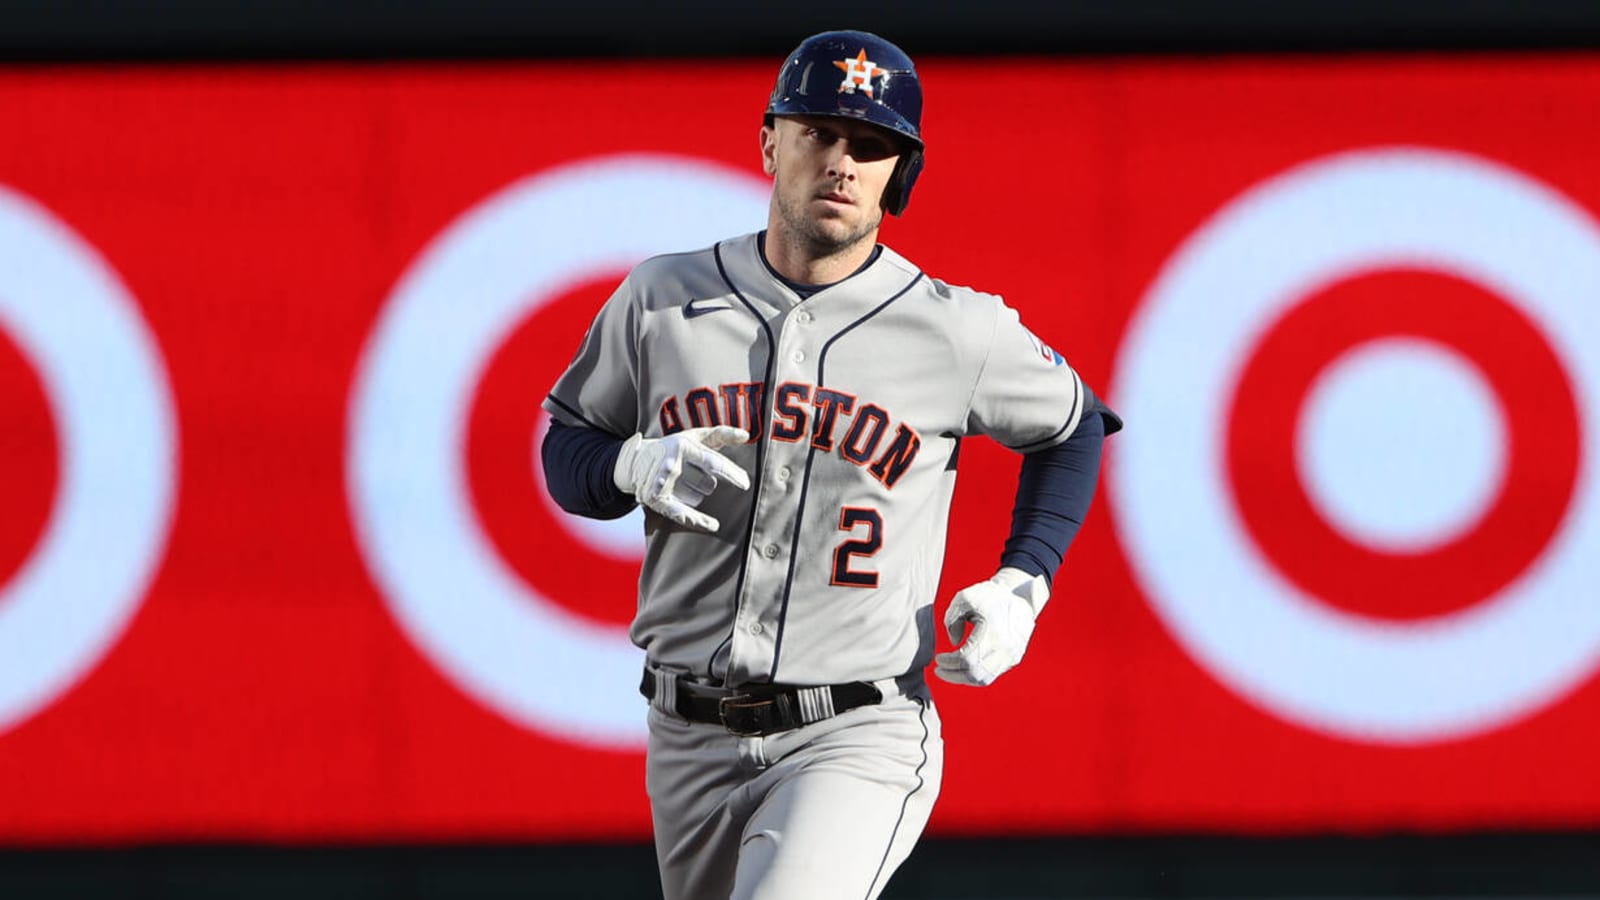 Astros may be open to trading one star player?